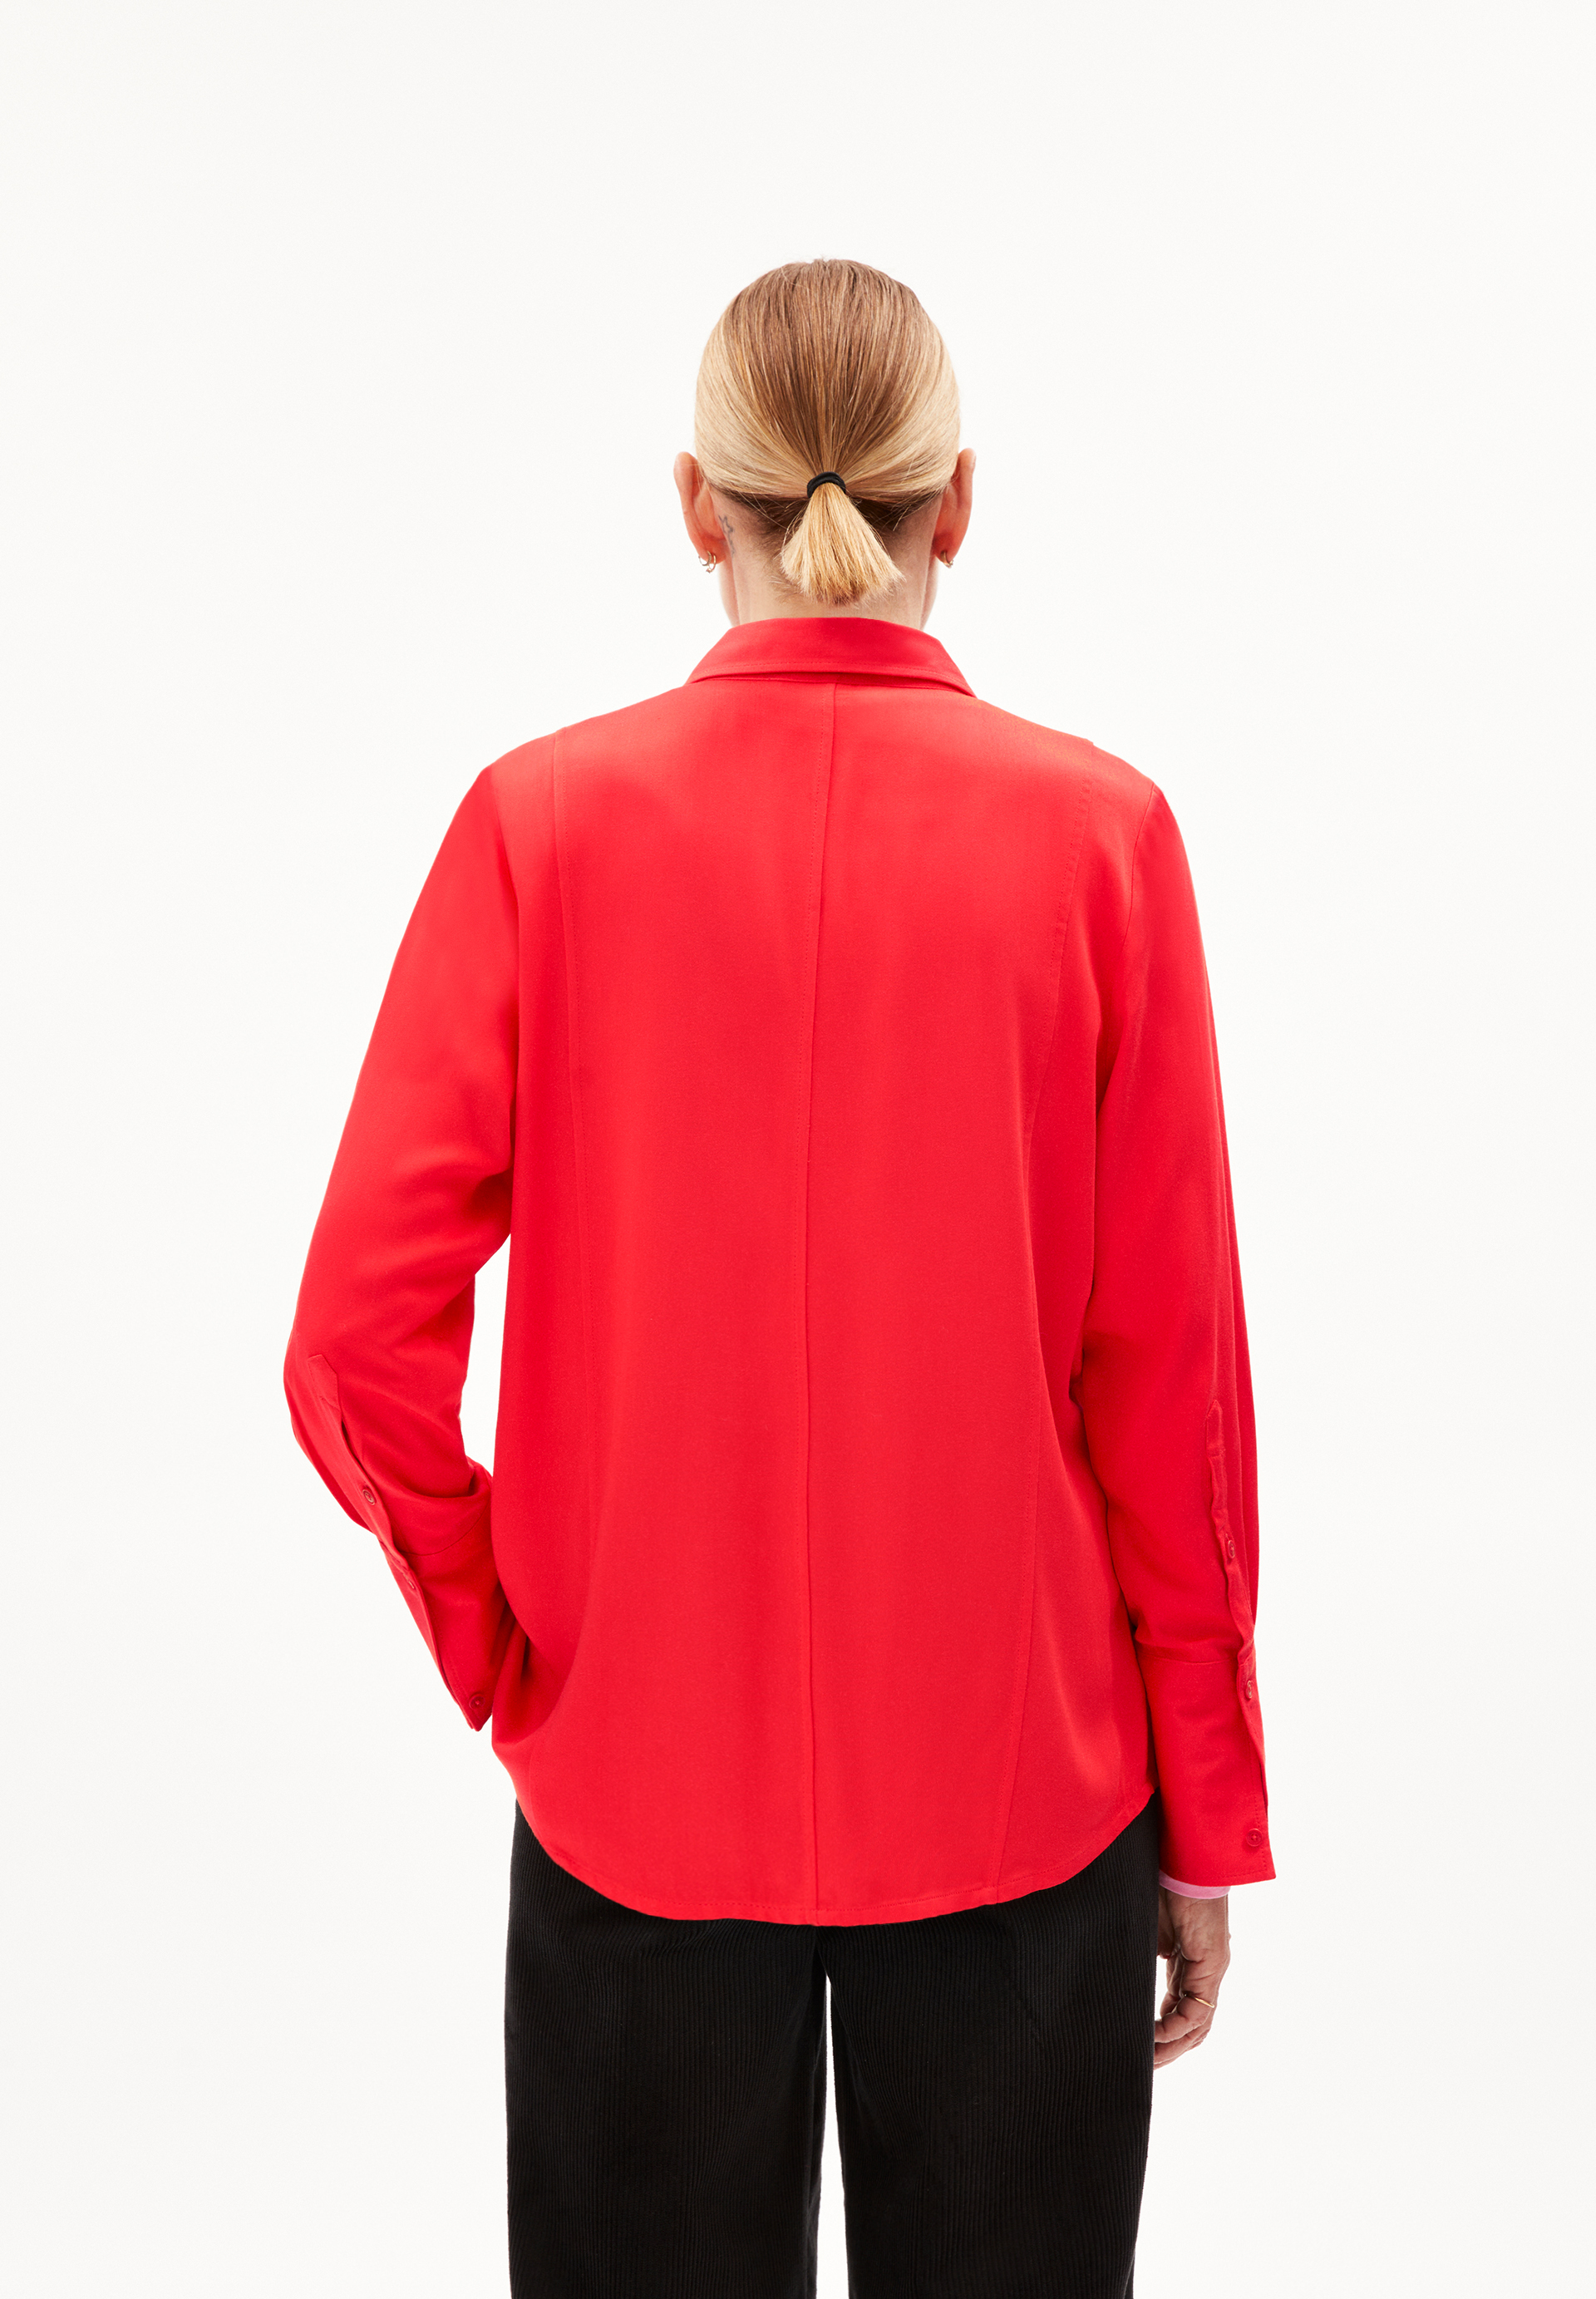 MOAANAS Blouse Relaxed Fit made of LENZING™ ECOVERO™ Viscose